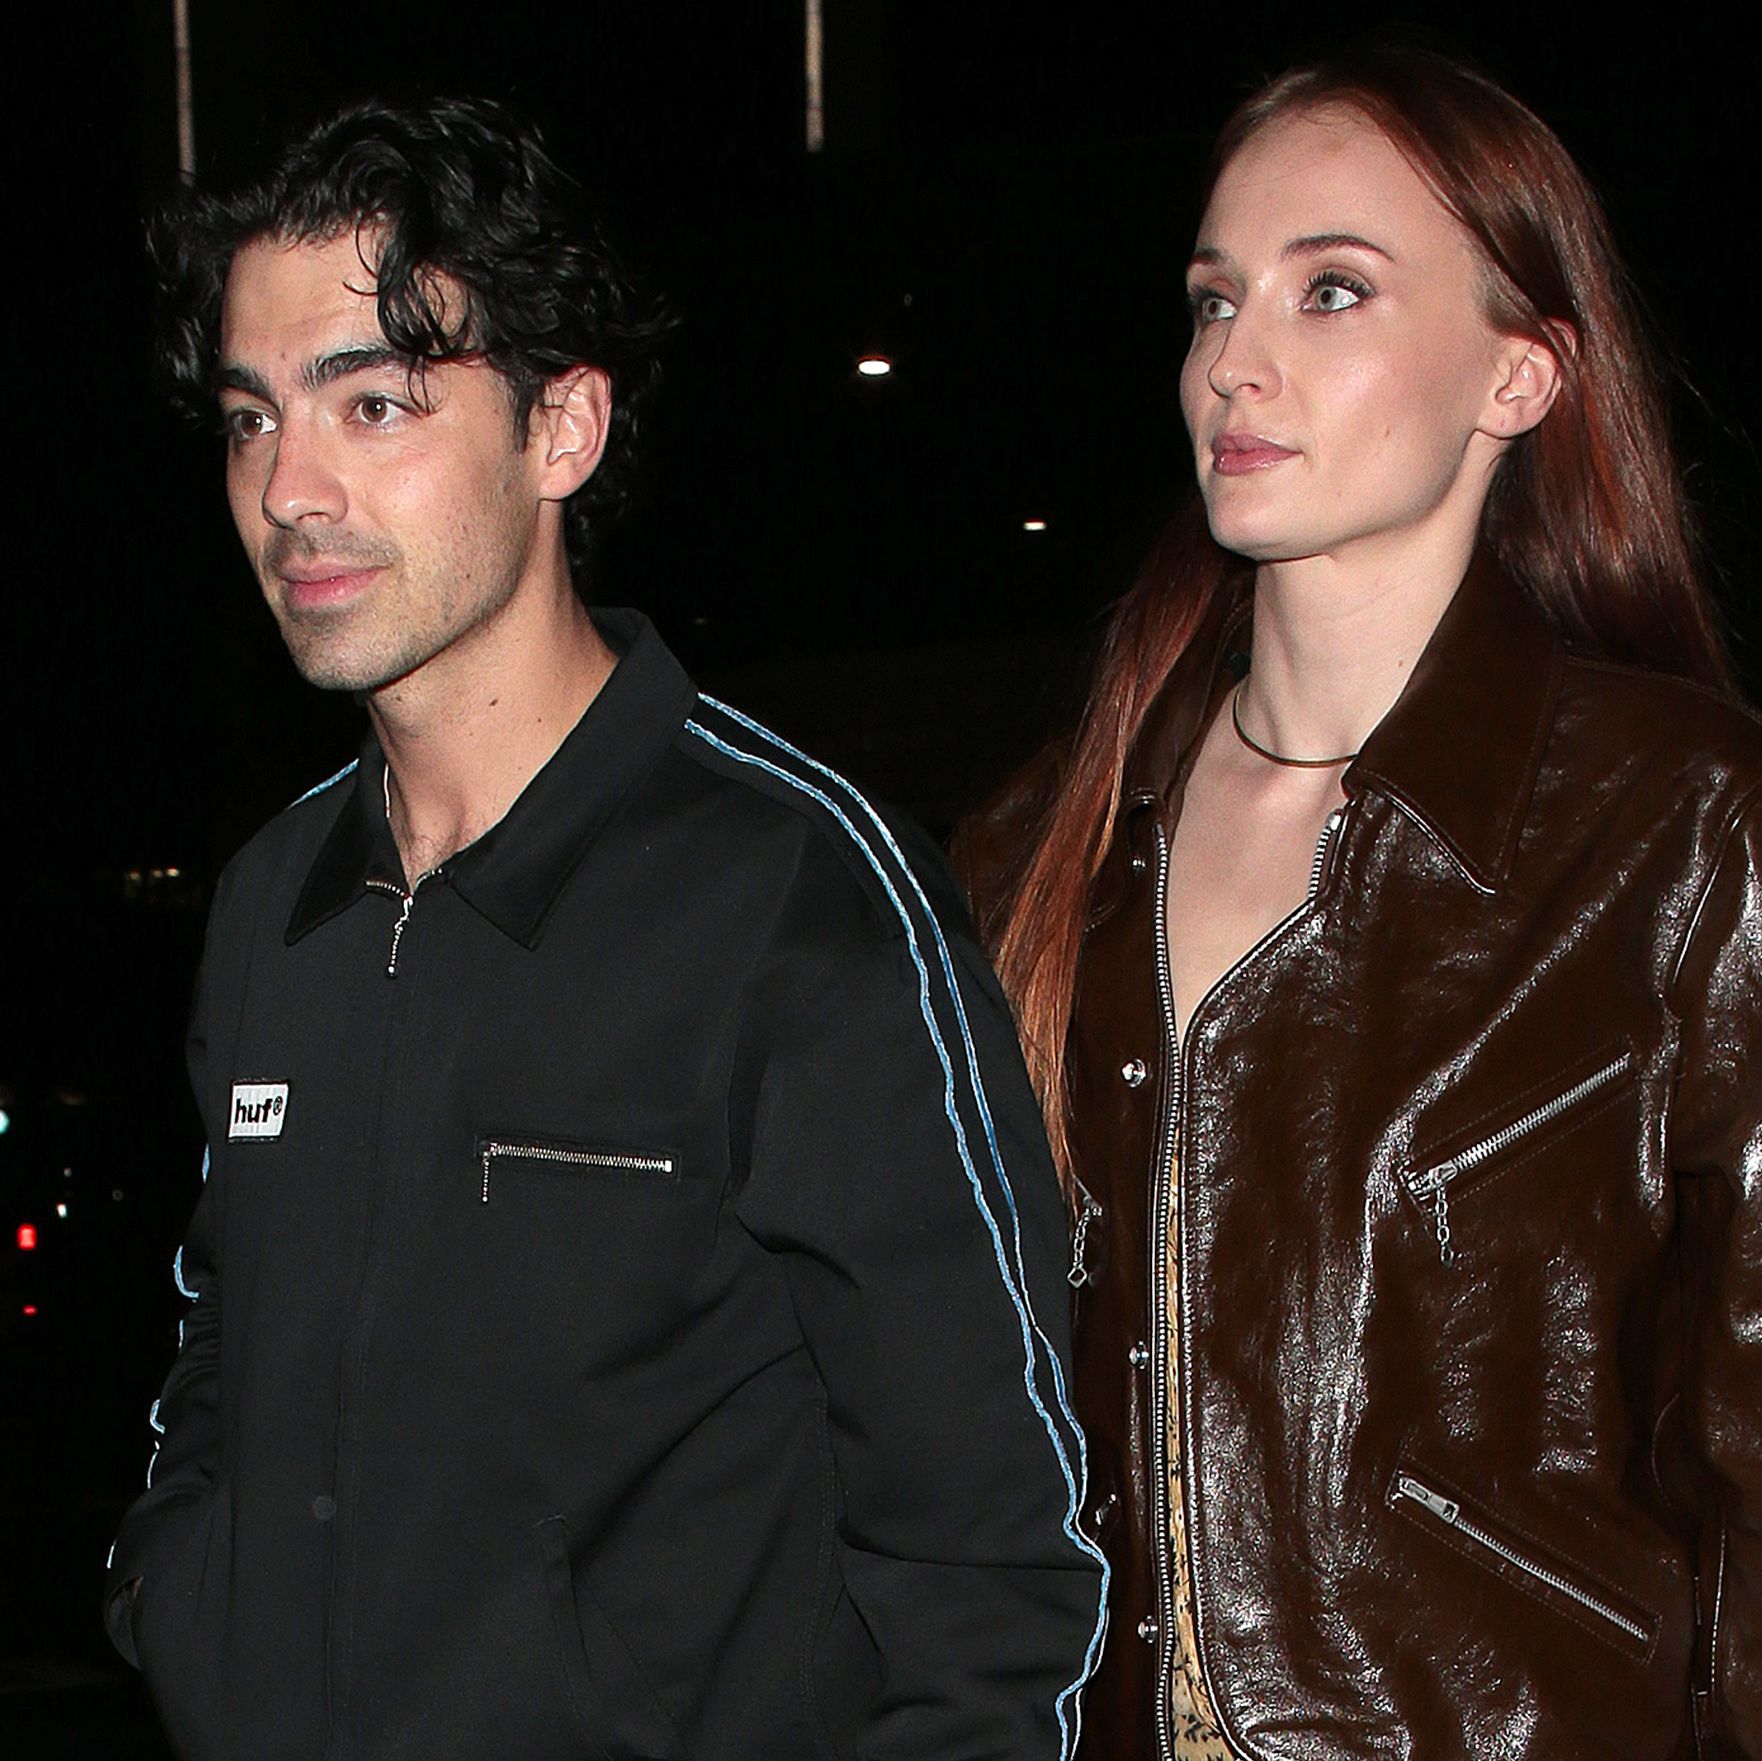 TMZ Finally Explained Why Joe Jonas and Sophie Turner Are Getting Divorced